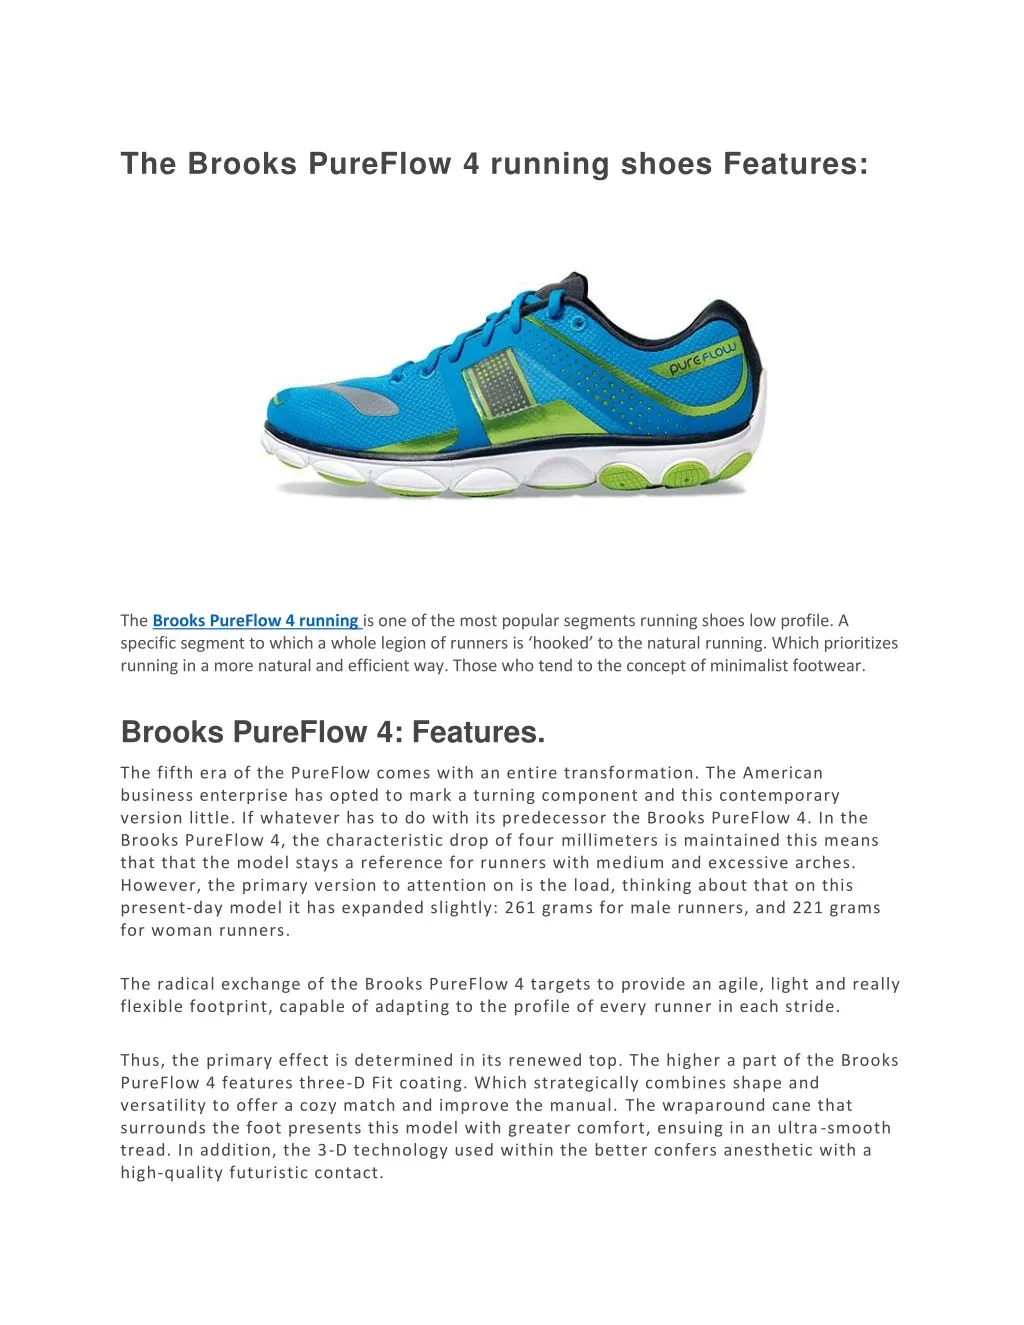 the brooks pureflow 4 running shoes features